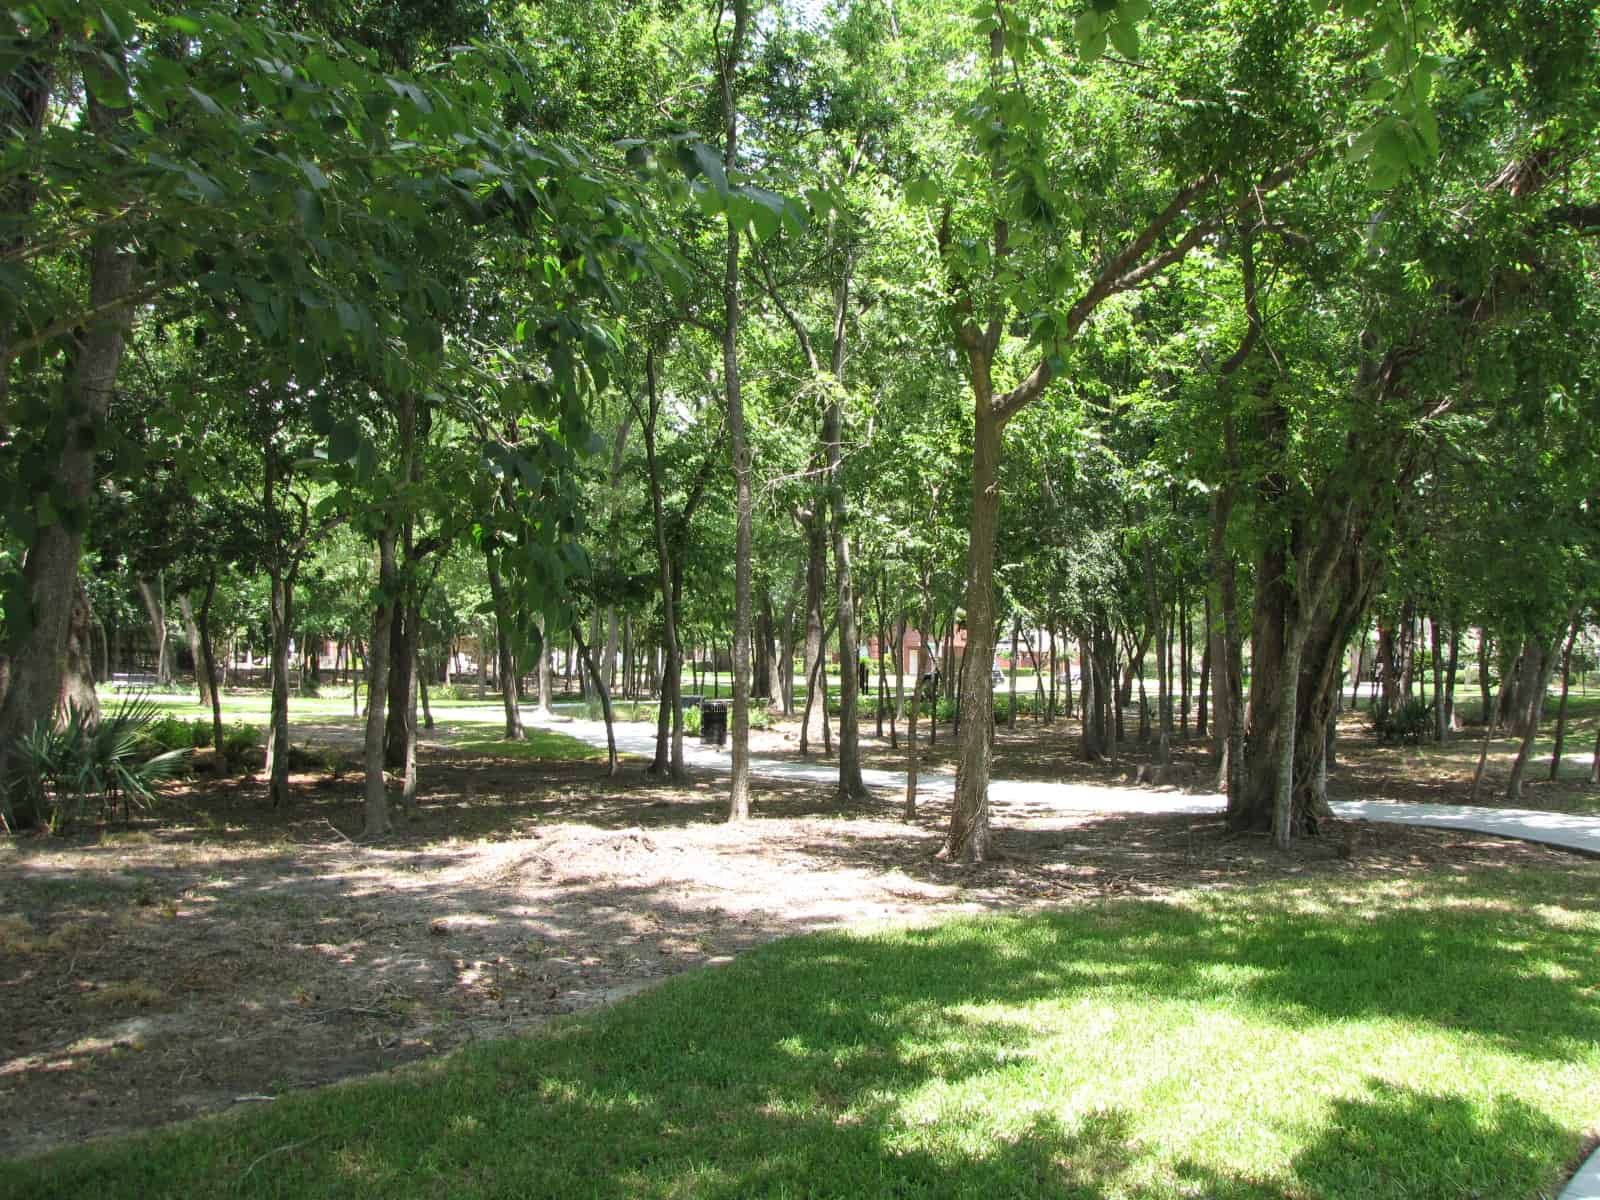 Path through Forested Area at Waller Park